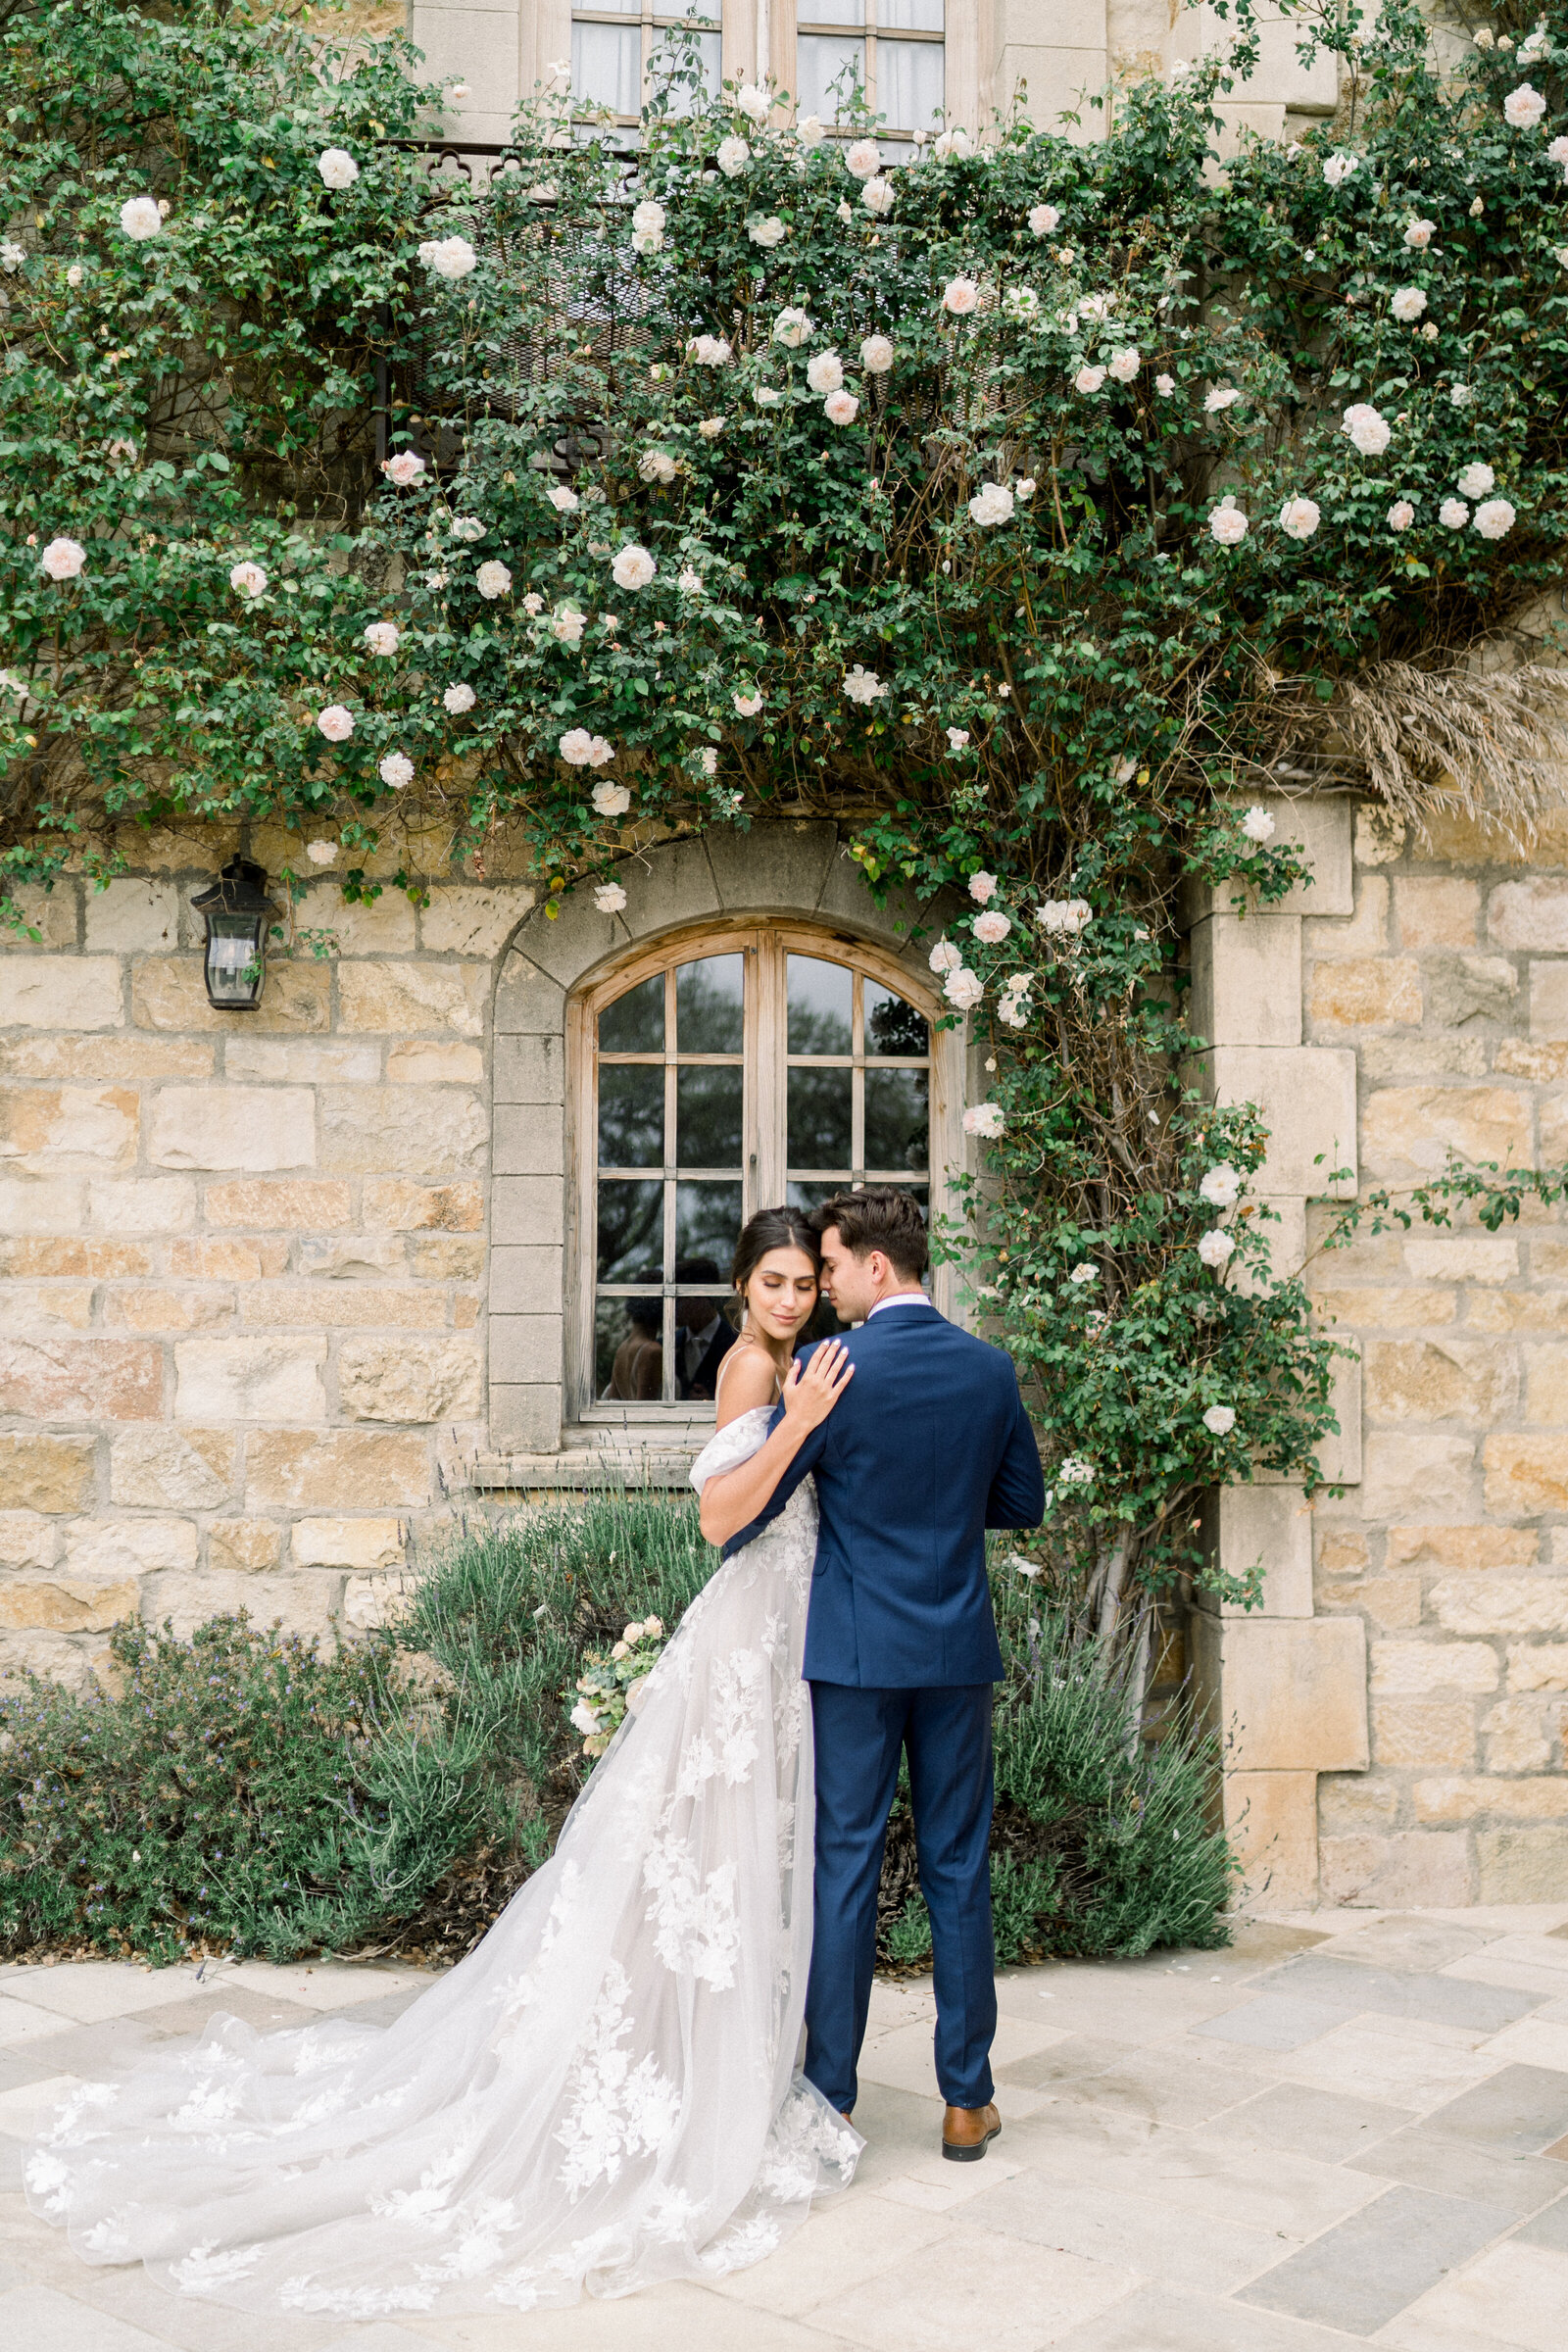 This stunning portrait by Tiffany Longeway features a radiant Napa Valley bride, highlighting her grace and the lush vineyard backdrop, perfect for luxury California weddings.